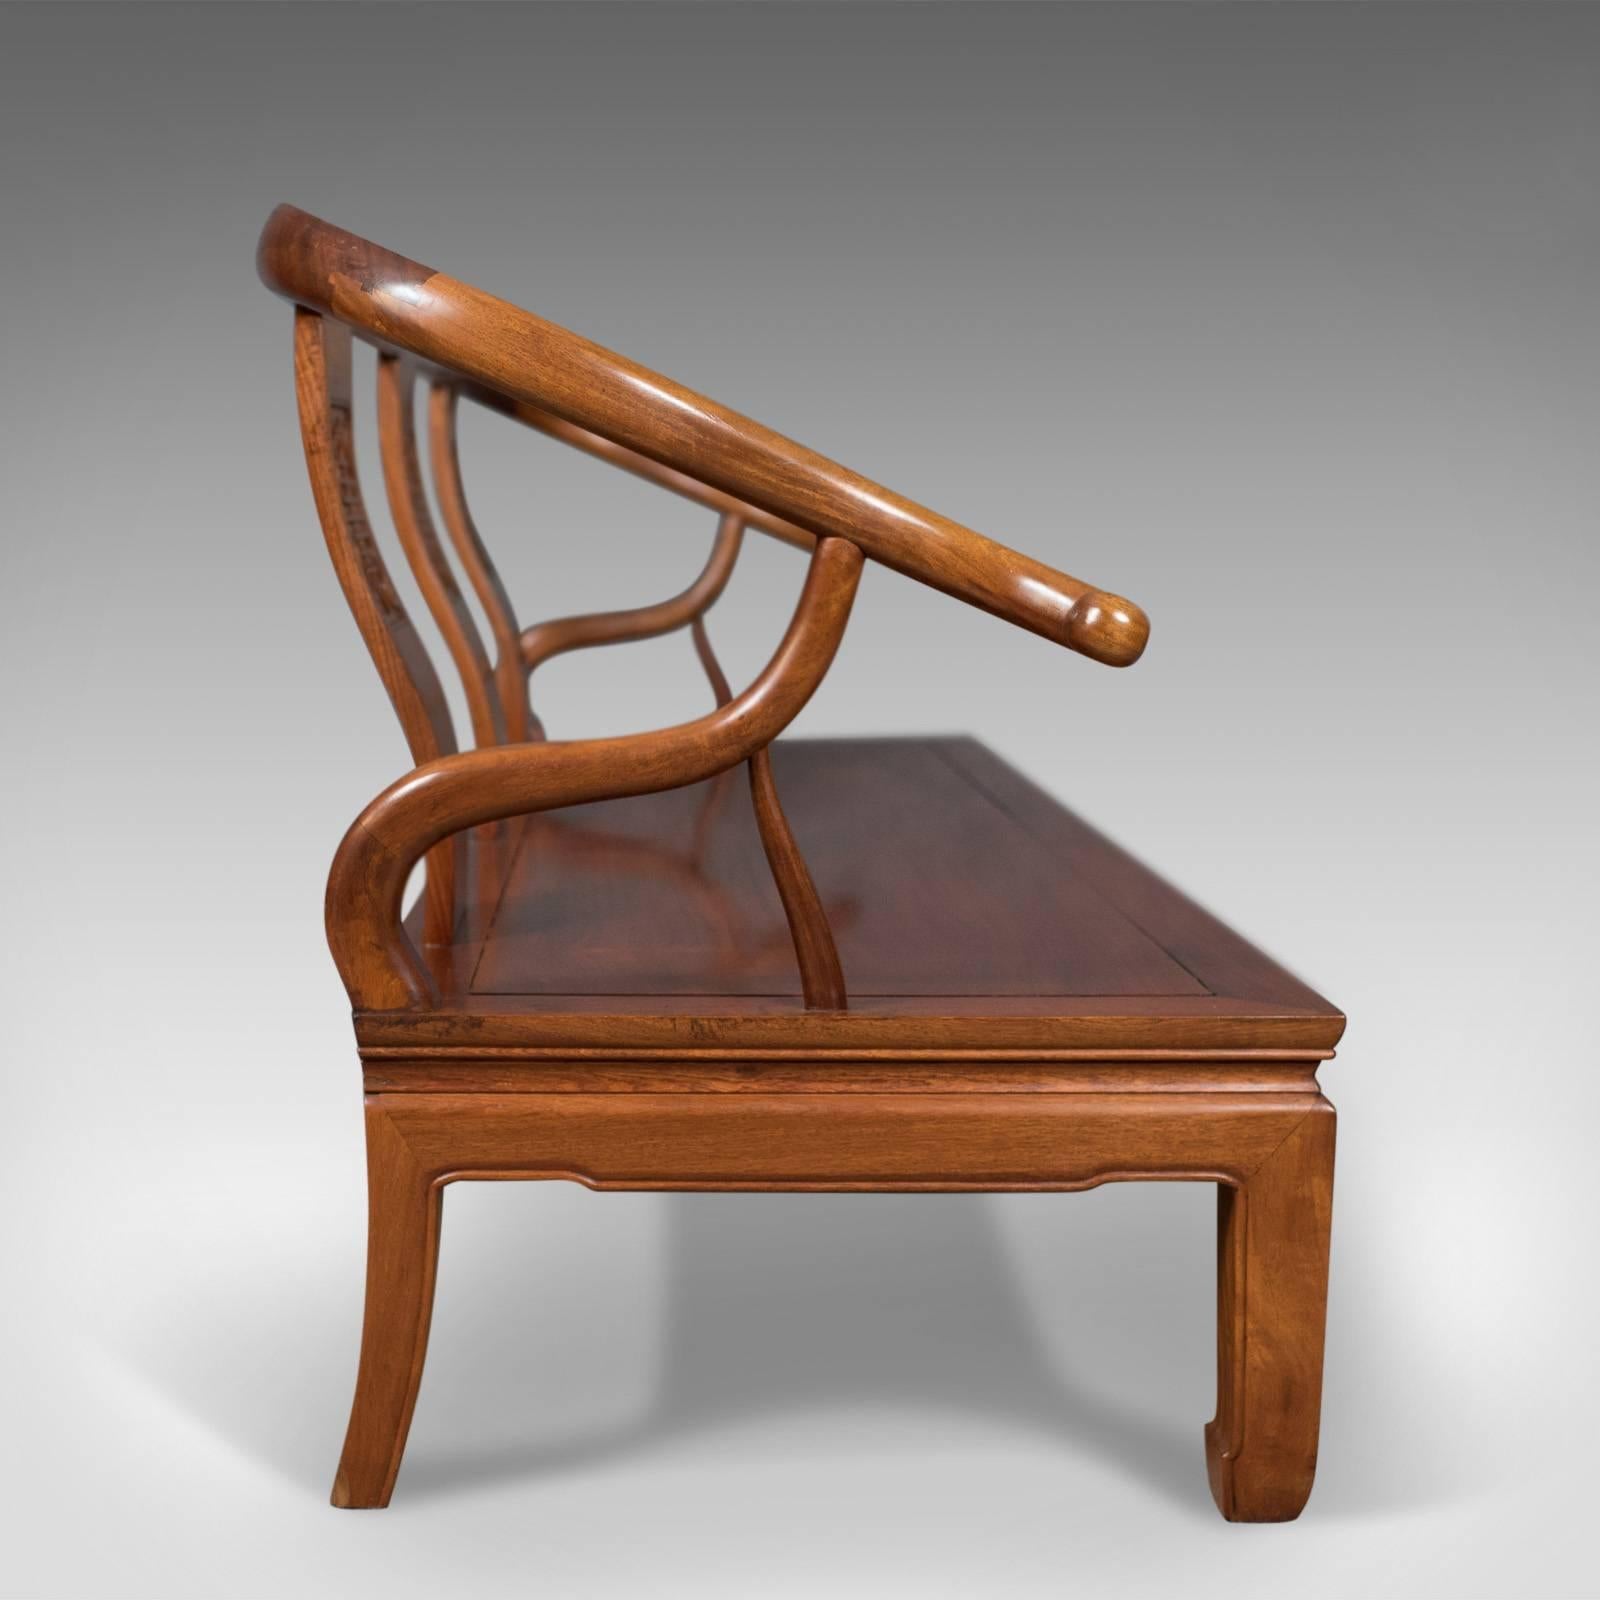 Chinese Export Chinese Rosewood Three-Seat Bench in Traditional Form, Late 20th Century